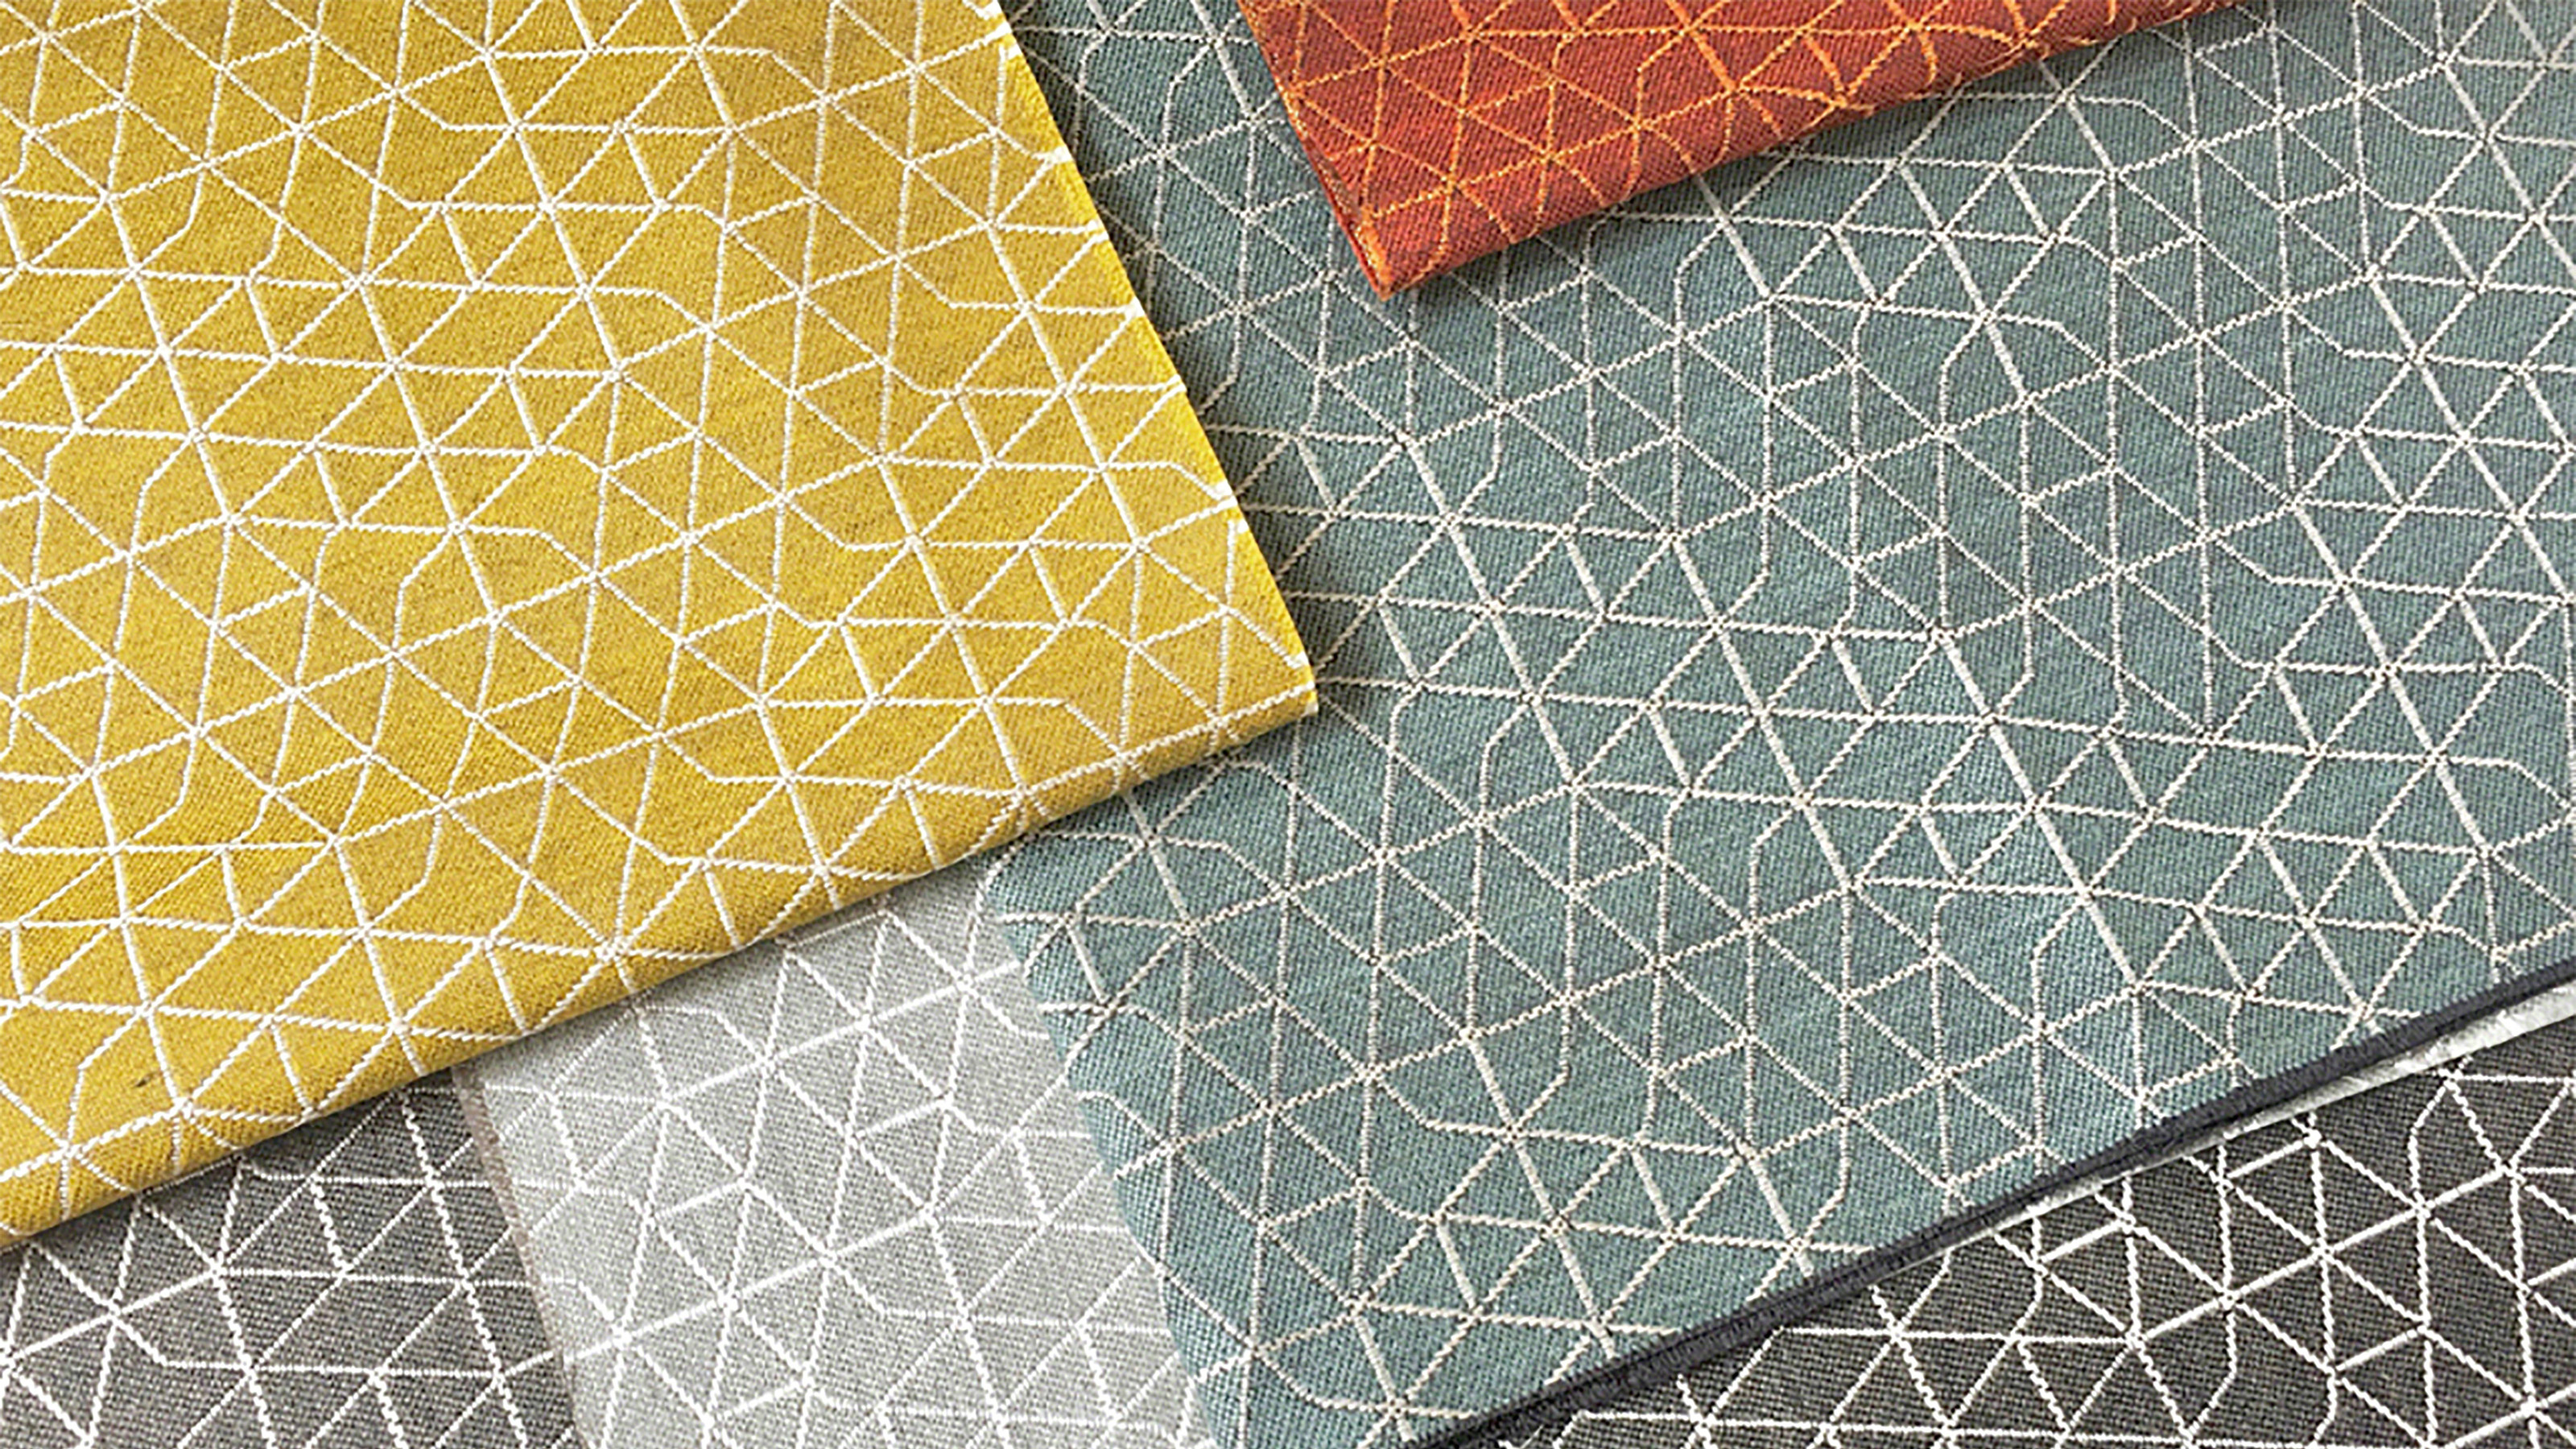 upholstery samples in a variety of colors with geometric embroidery